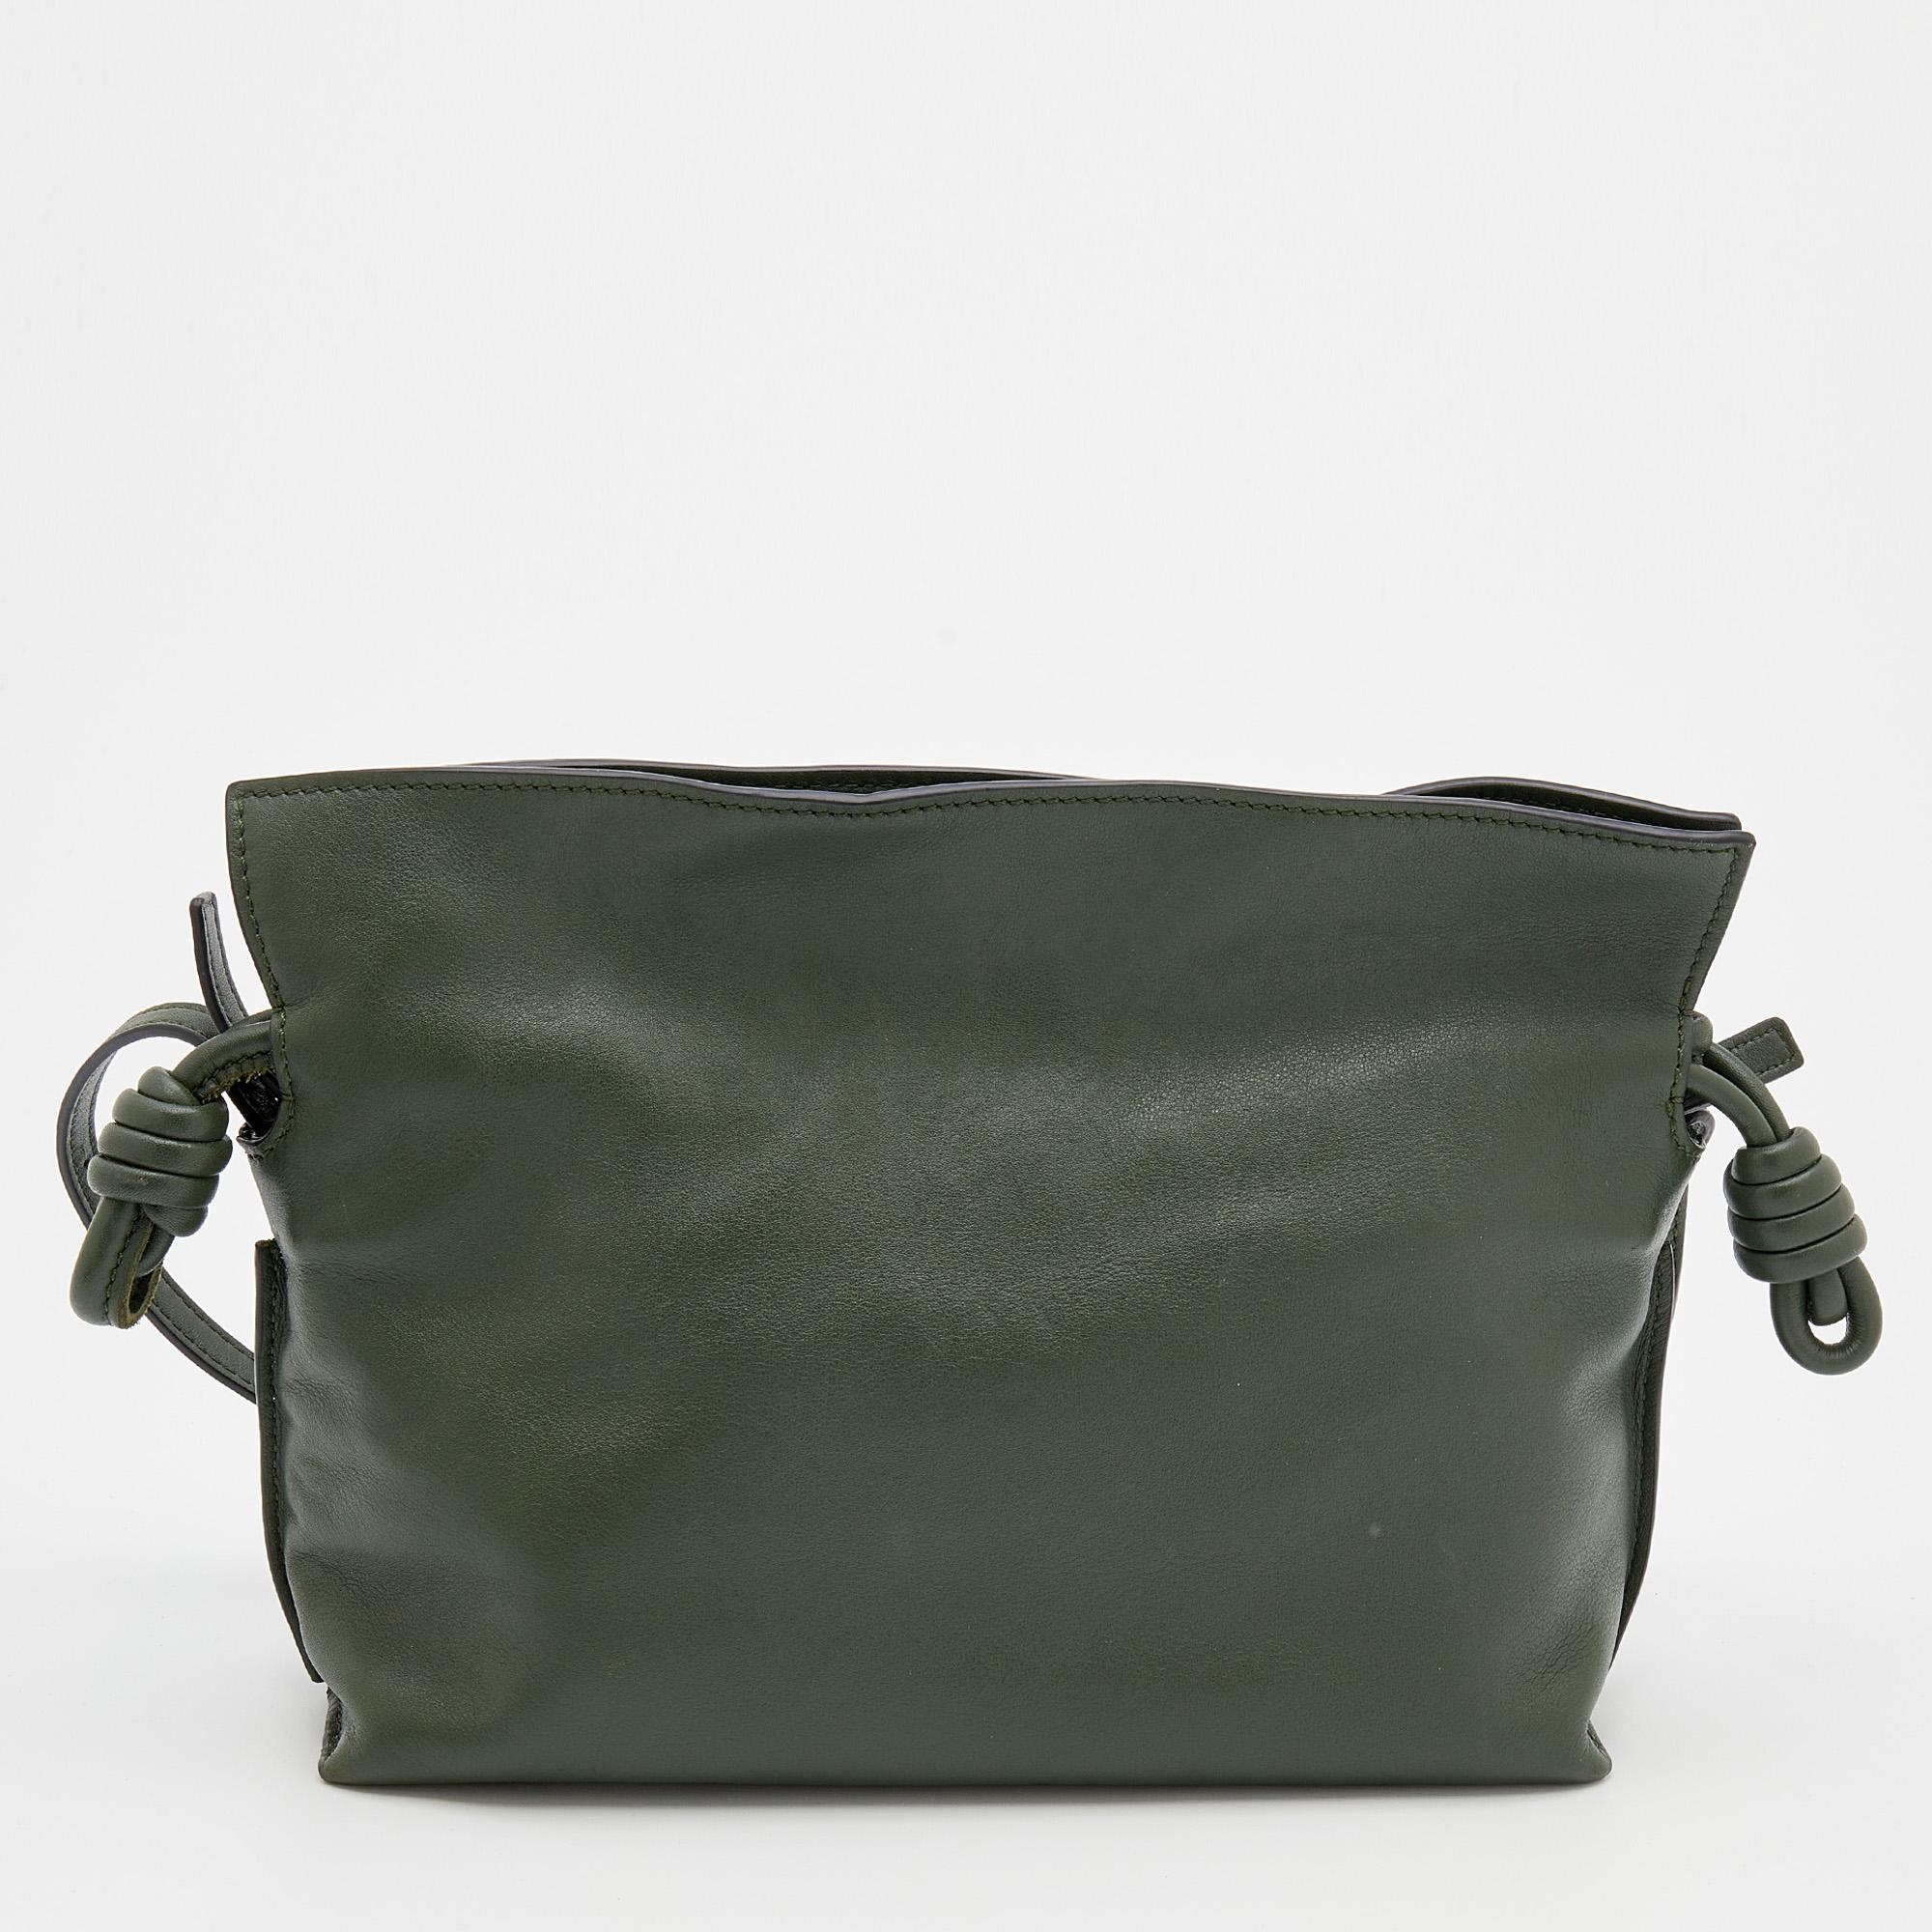 Loewe's Flamenco clutch closes with the help of drawstring pulls in coiled knots like a beautifully wrapped present. This version is in olive green leather. It is lined with suede and accompanied by a shoulder strap.

Includes: Brand Tag